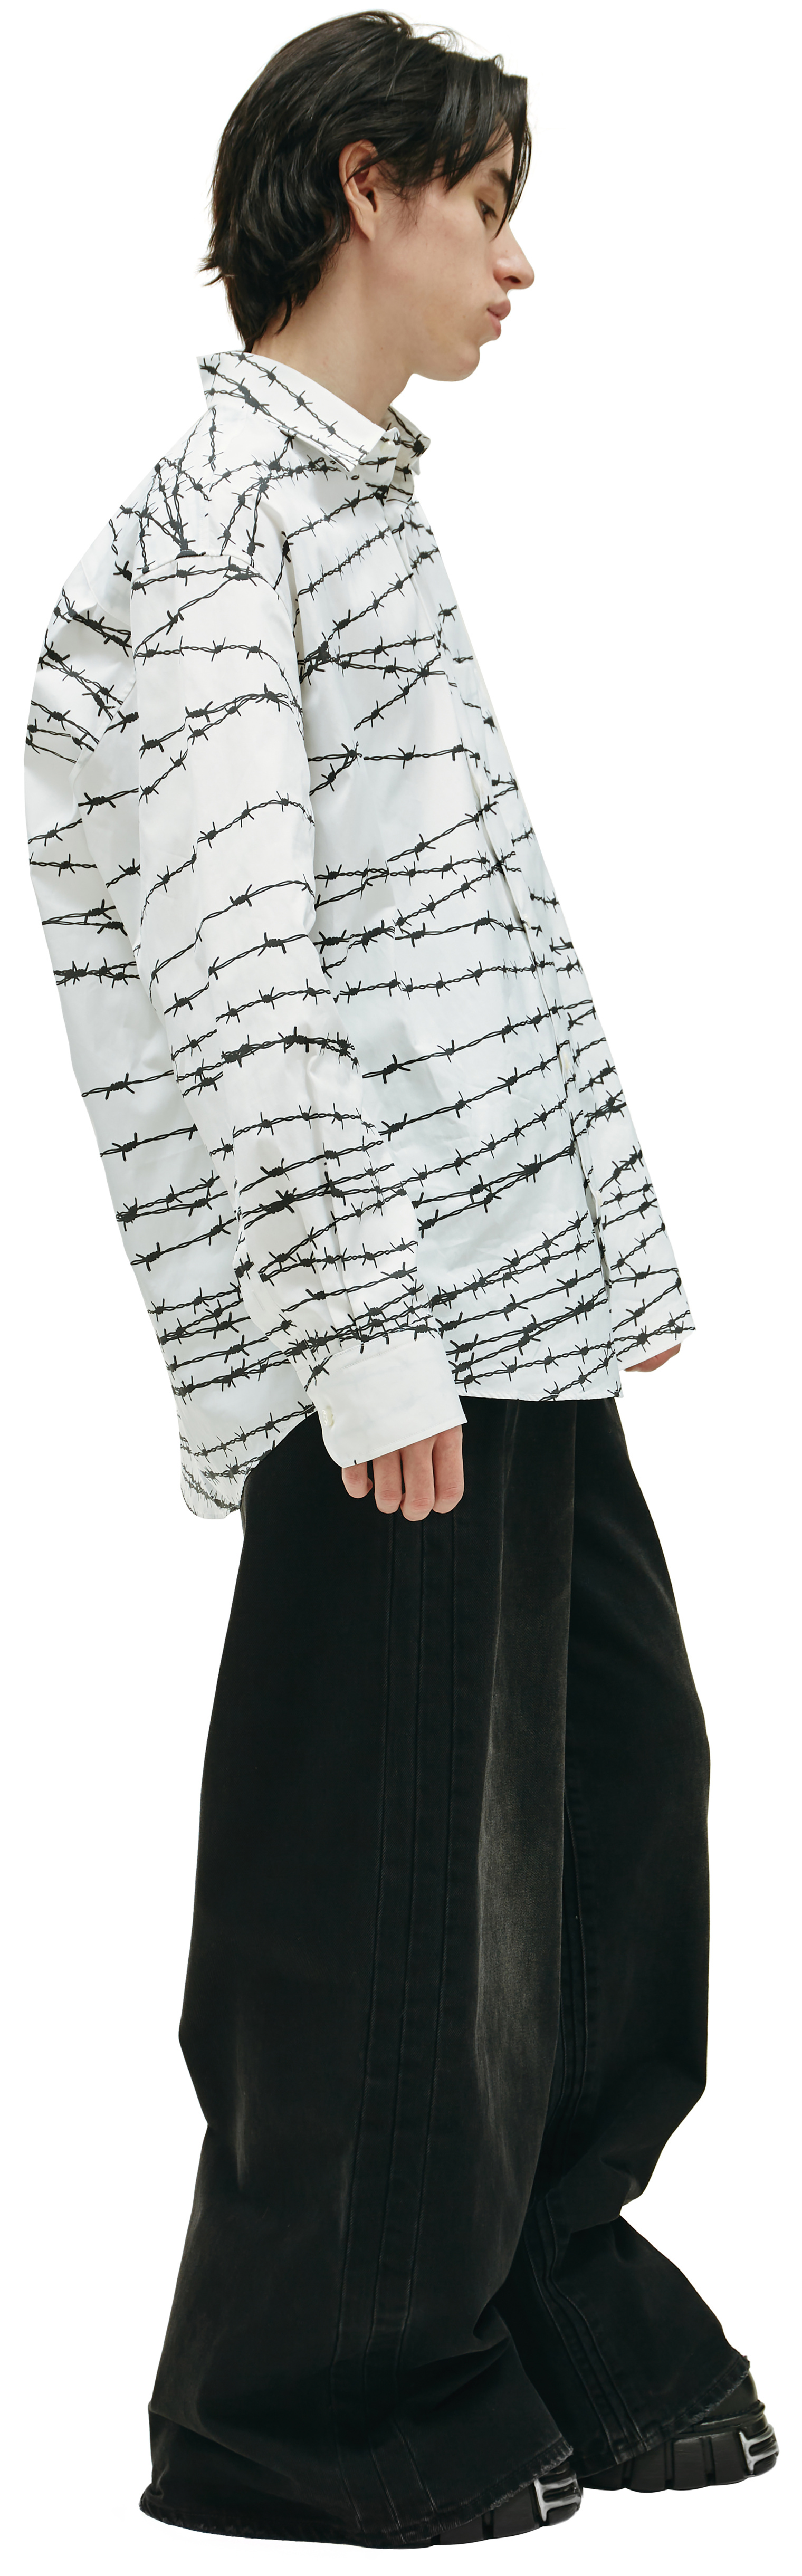 VETEMENTS Wired printed shirt